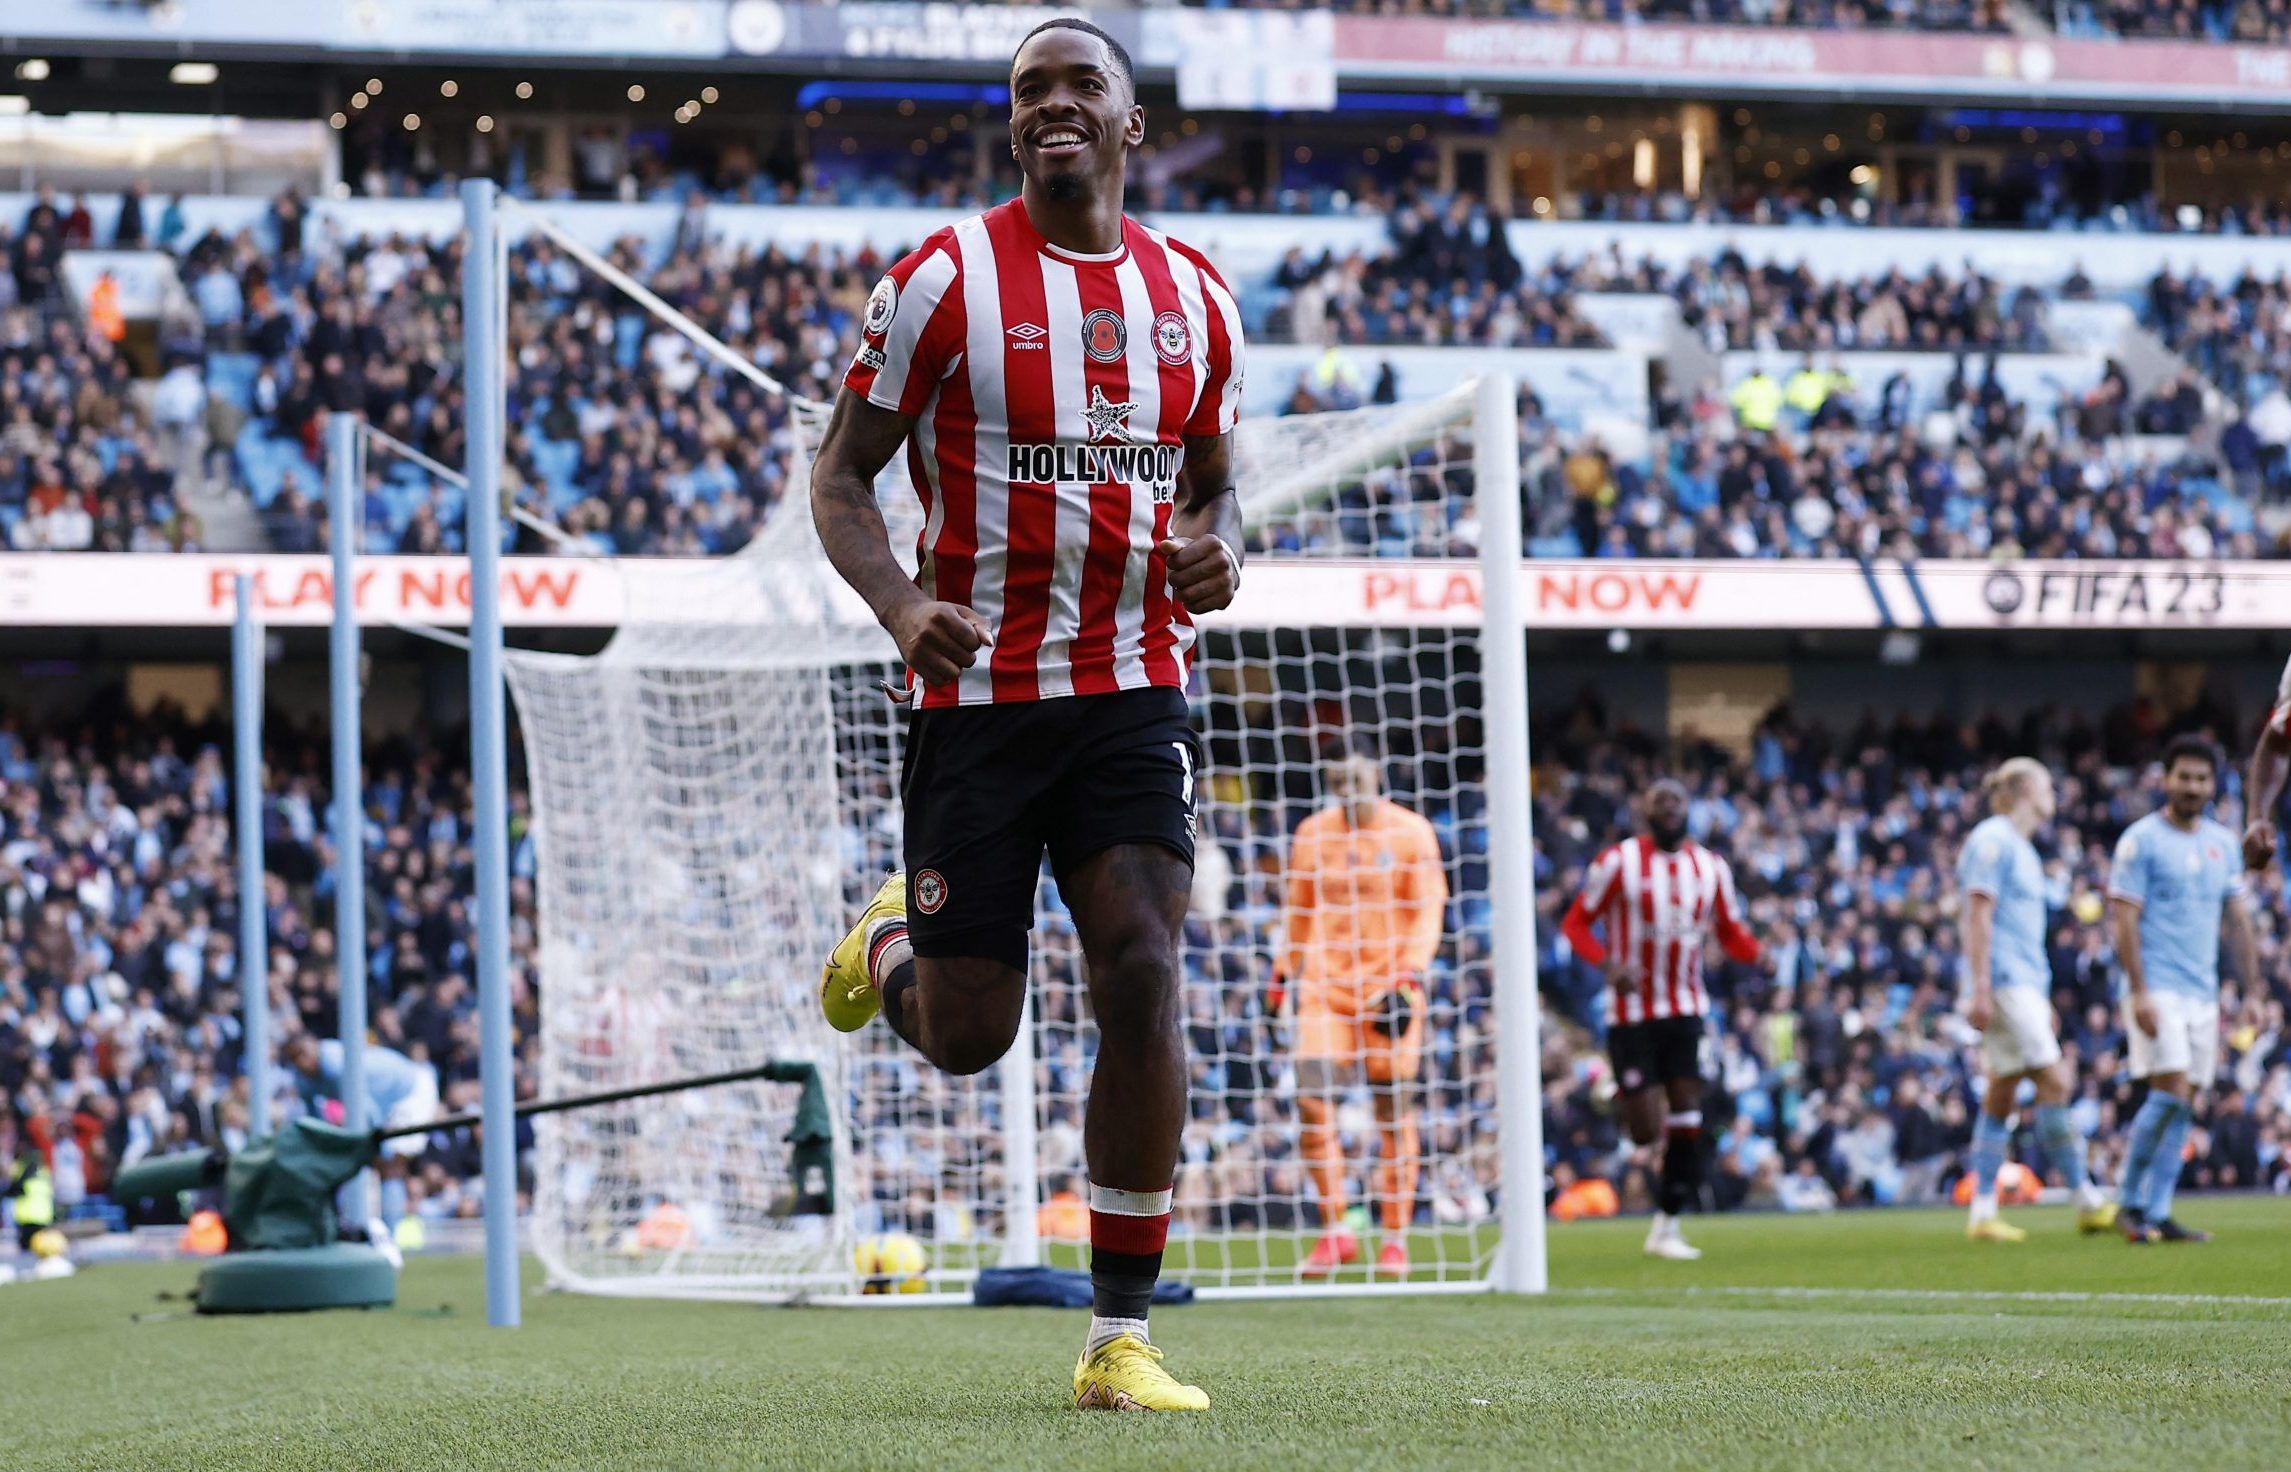 Soccer Football - Premier League - Manchester City v Brentford - Etihad Stadium, Manchester, Britain - November 12, 2022  Brentford's Ivan Toney celebrates scoring their second goal Action Images via Reuters/Jason Cairnduff EDITORIAL USE ONLY. No use with unauthorized audio, video, data, fixture lists, club/league logos or 'live' services. Online in-match use limited to 75 images, no video emulation. No use in betting, games or single club /league/player publications.  Please contact your accoun